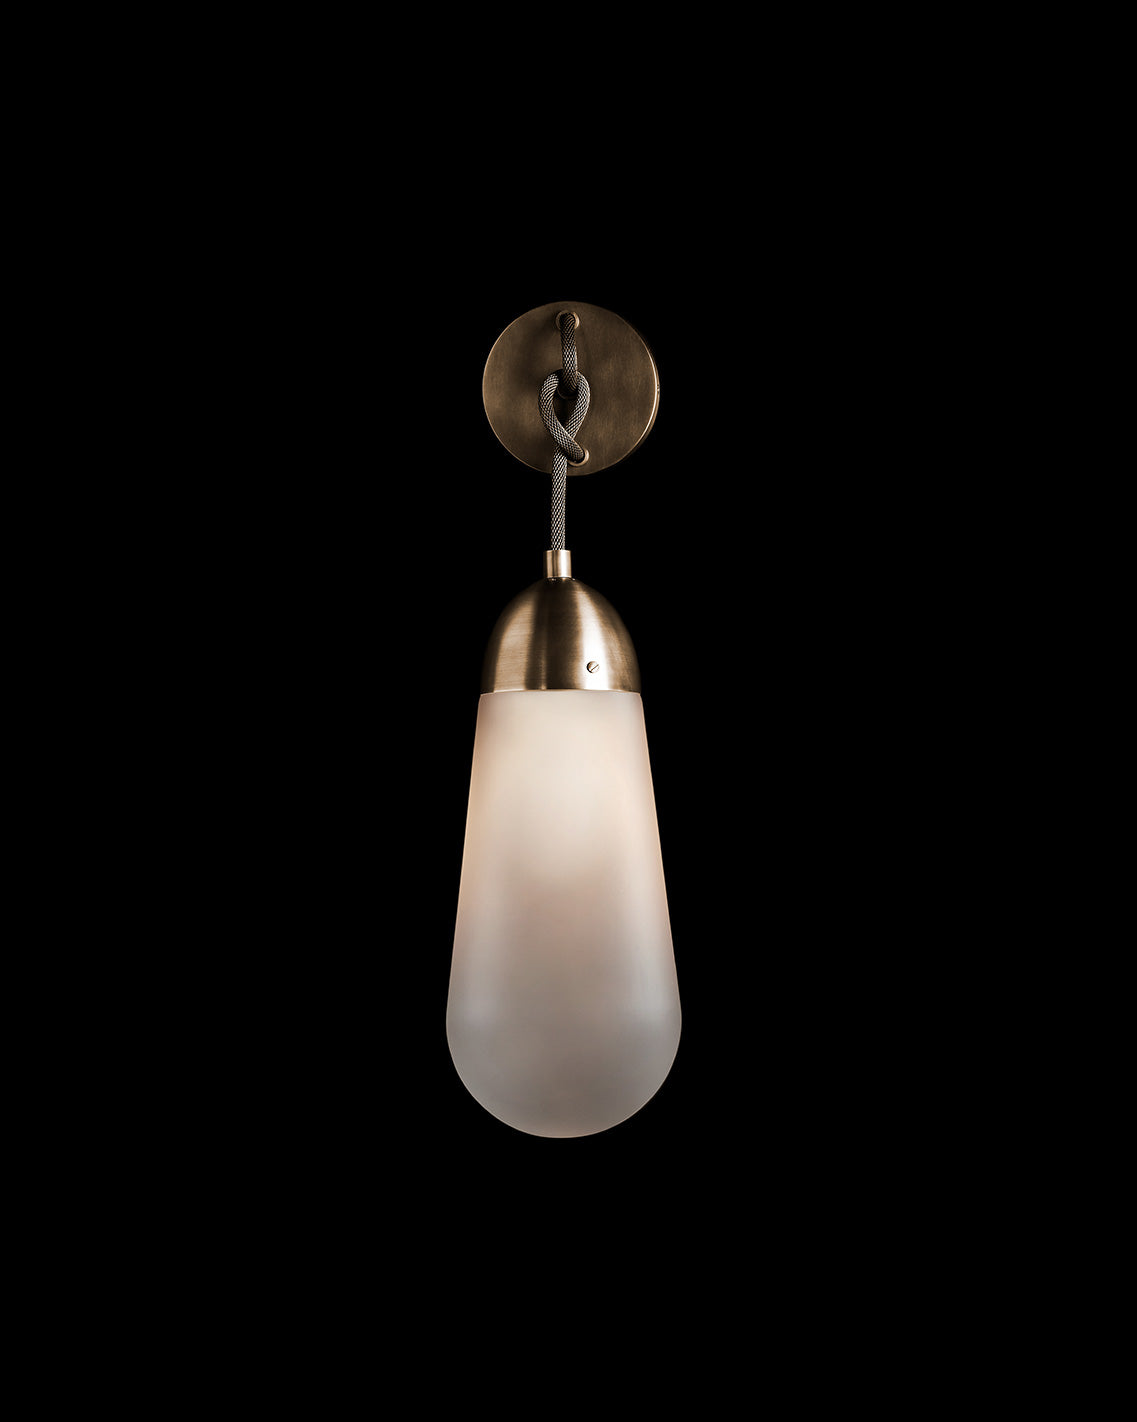 An illuminated LARIAT sconce mounted to a black wall. 